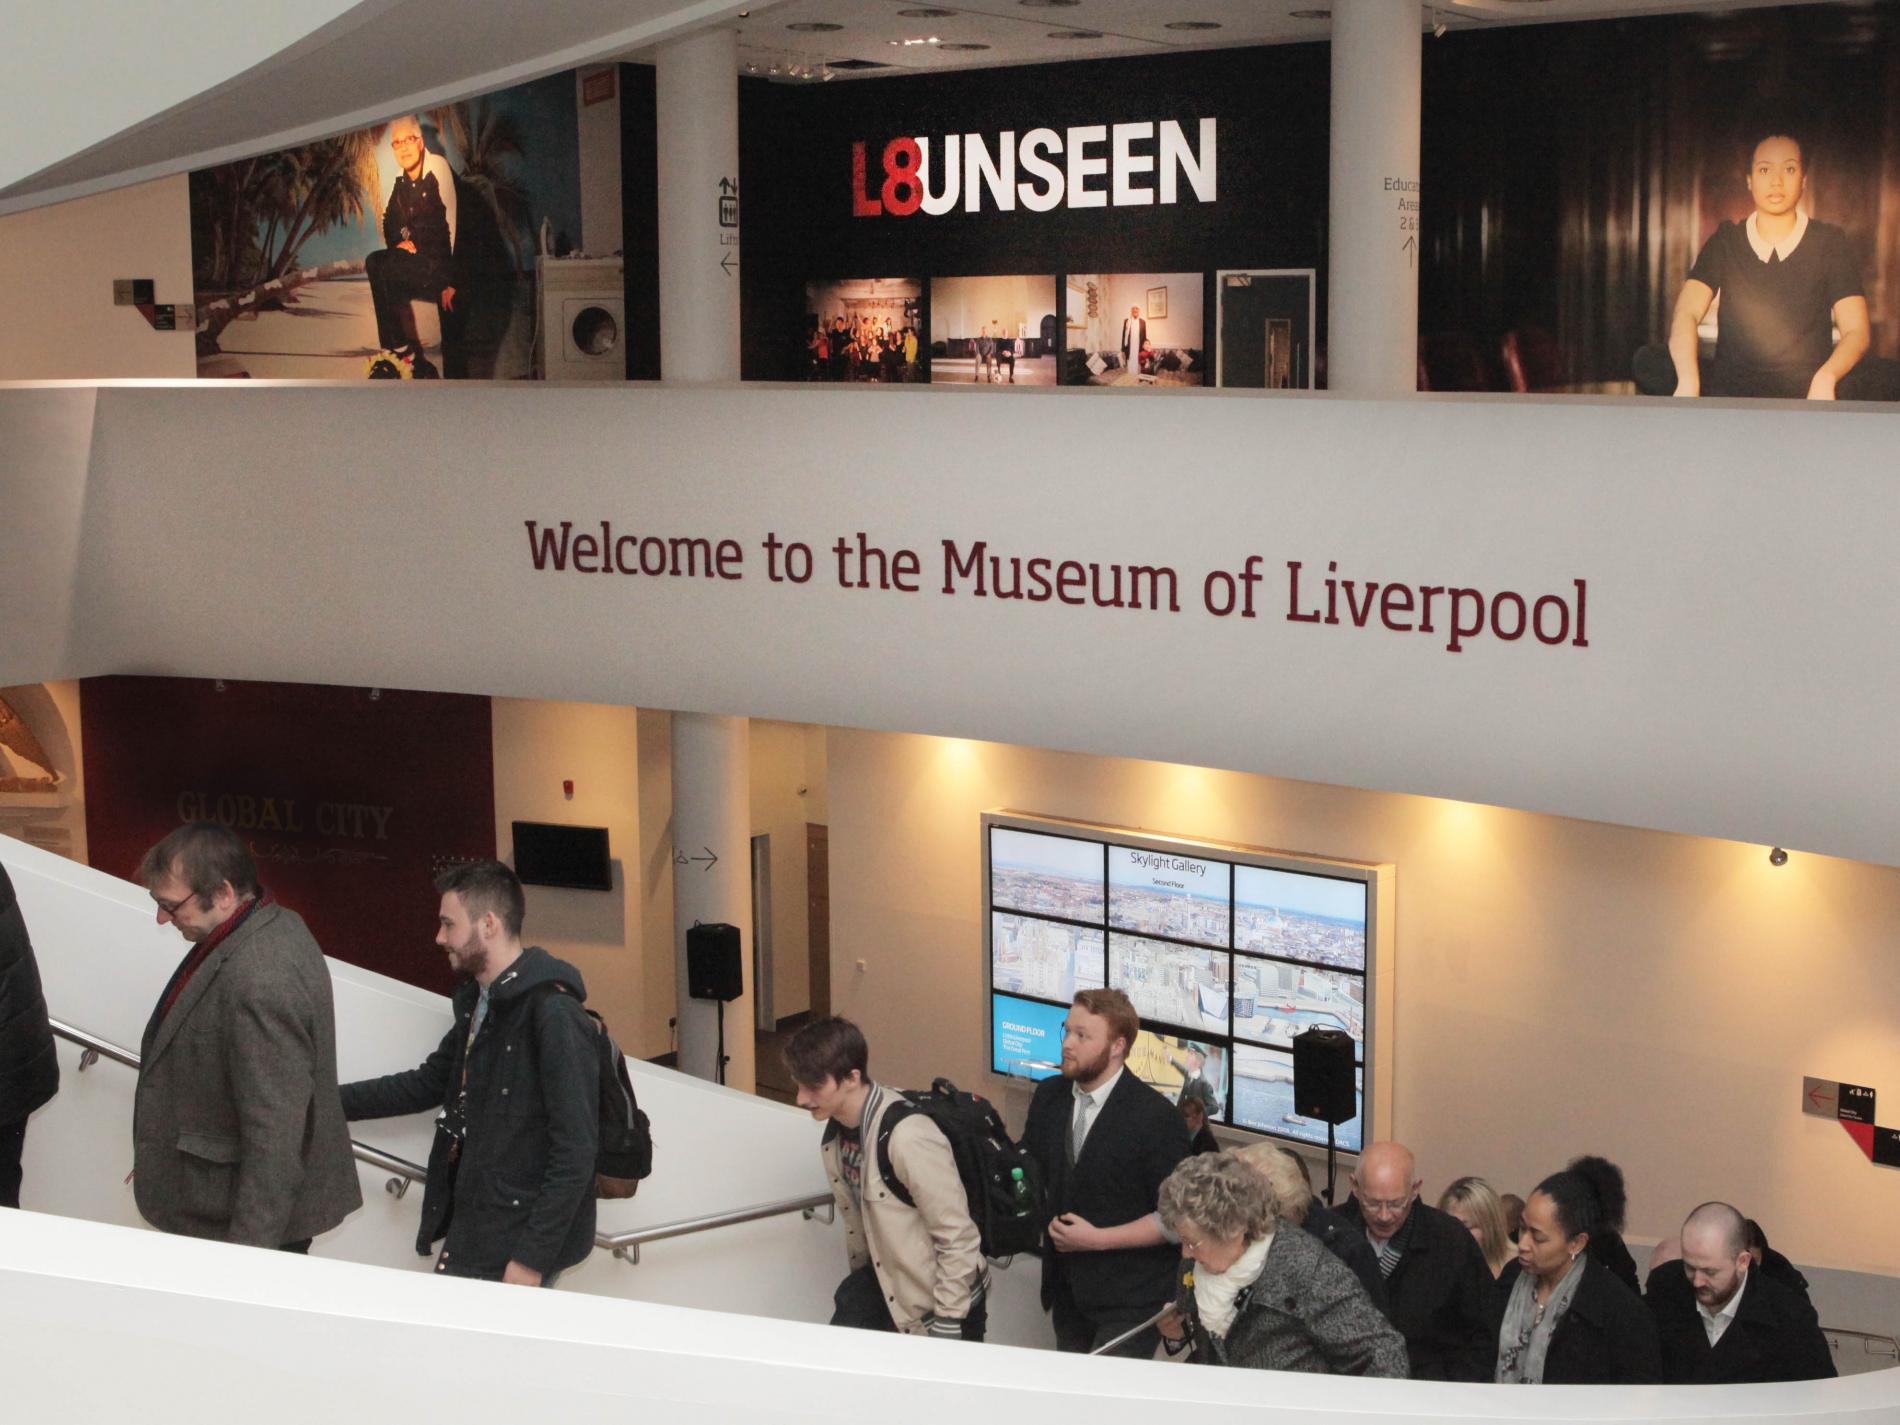 L8 Unseen exhibition - portraits of the Liverpool 8 community